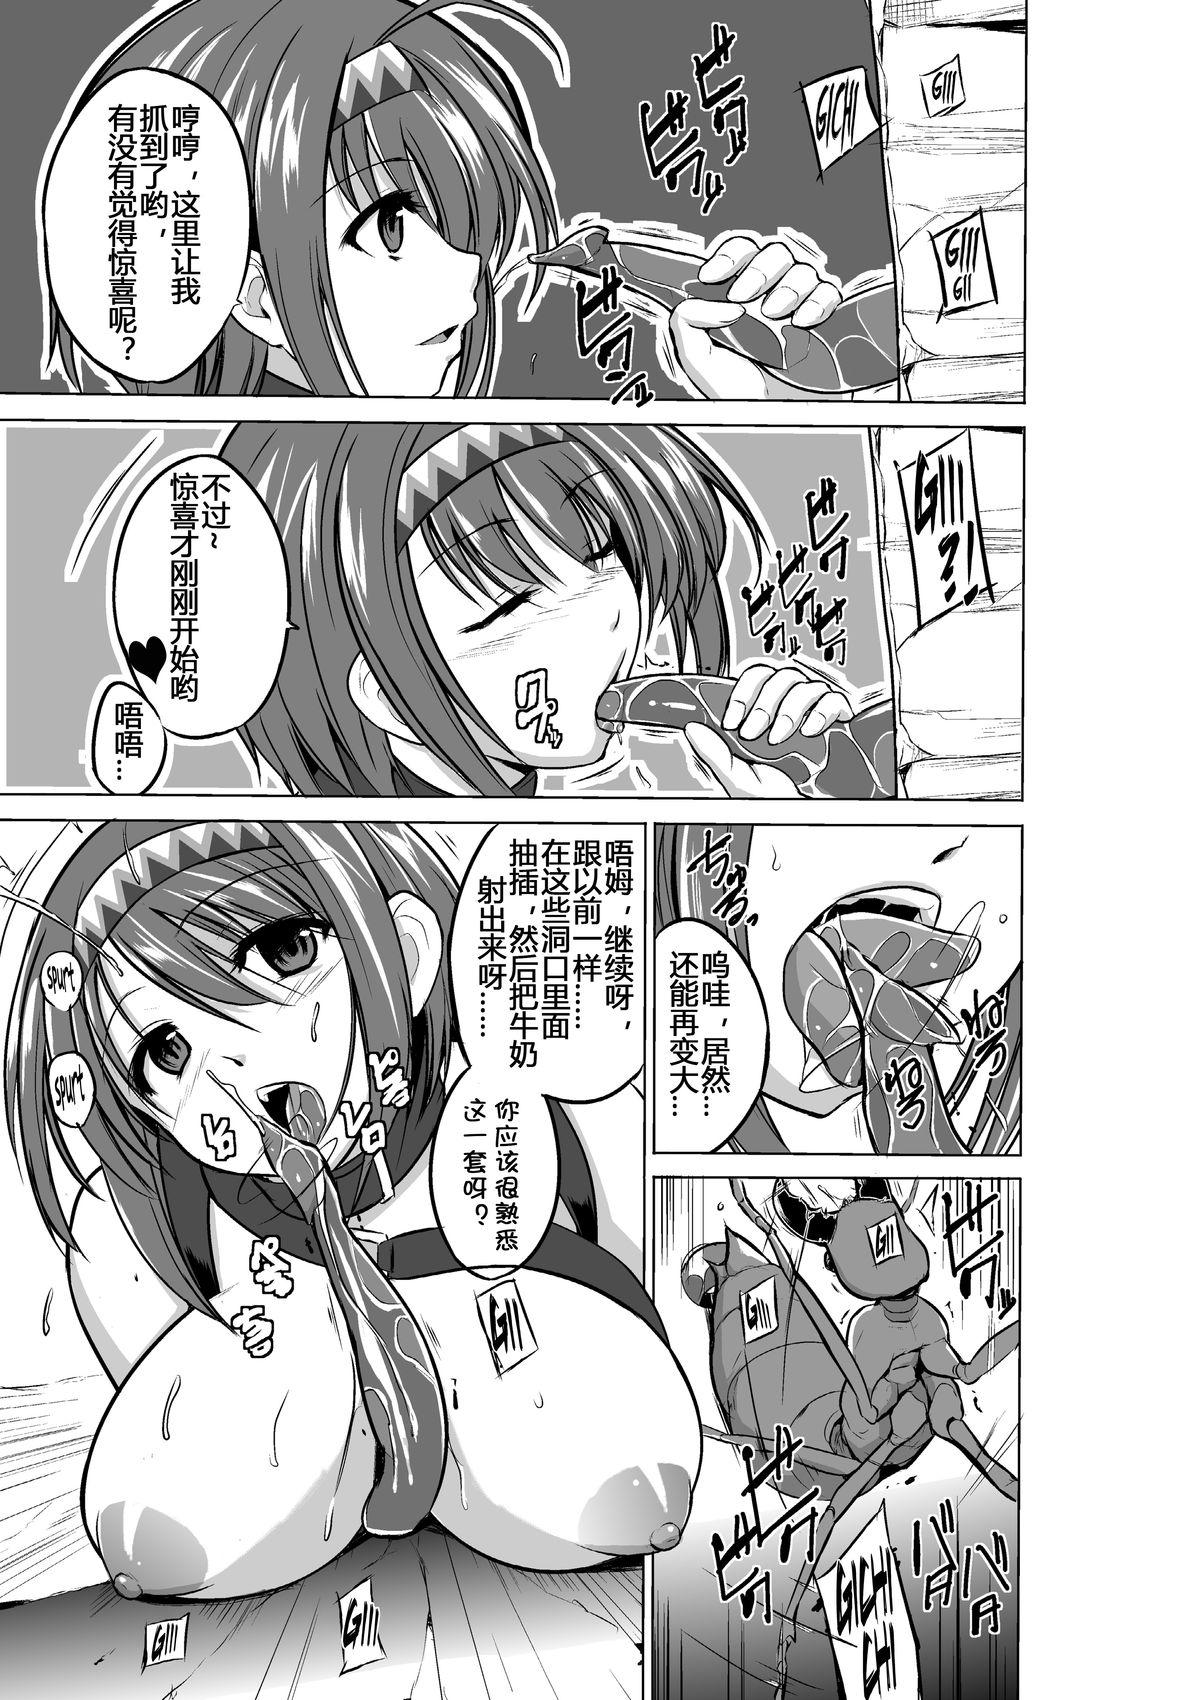 Crossdresser Dungeon Travelers - Chie no Himegoto - Toheart2 Homosexual - Page 13